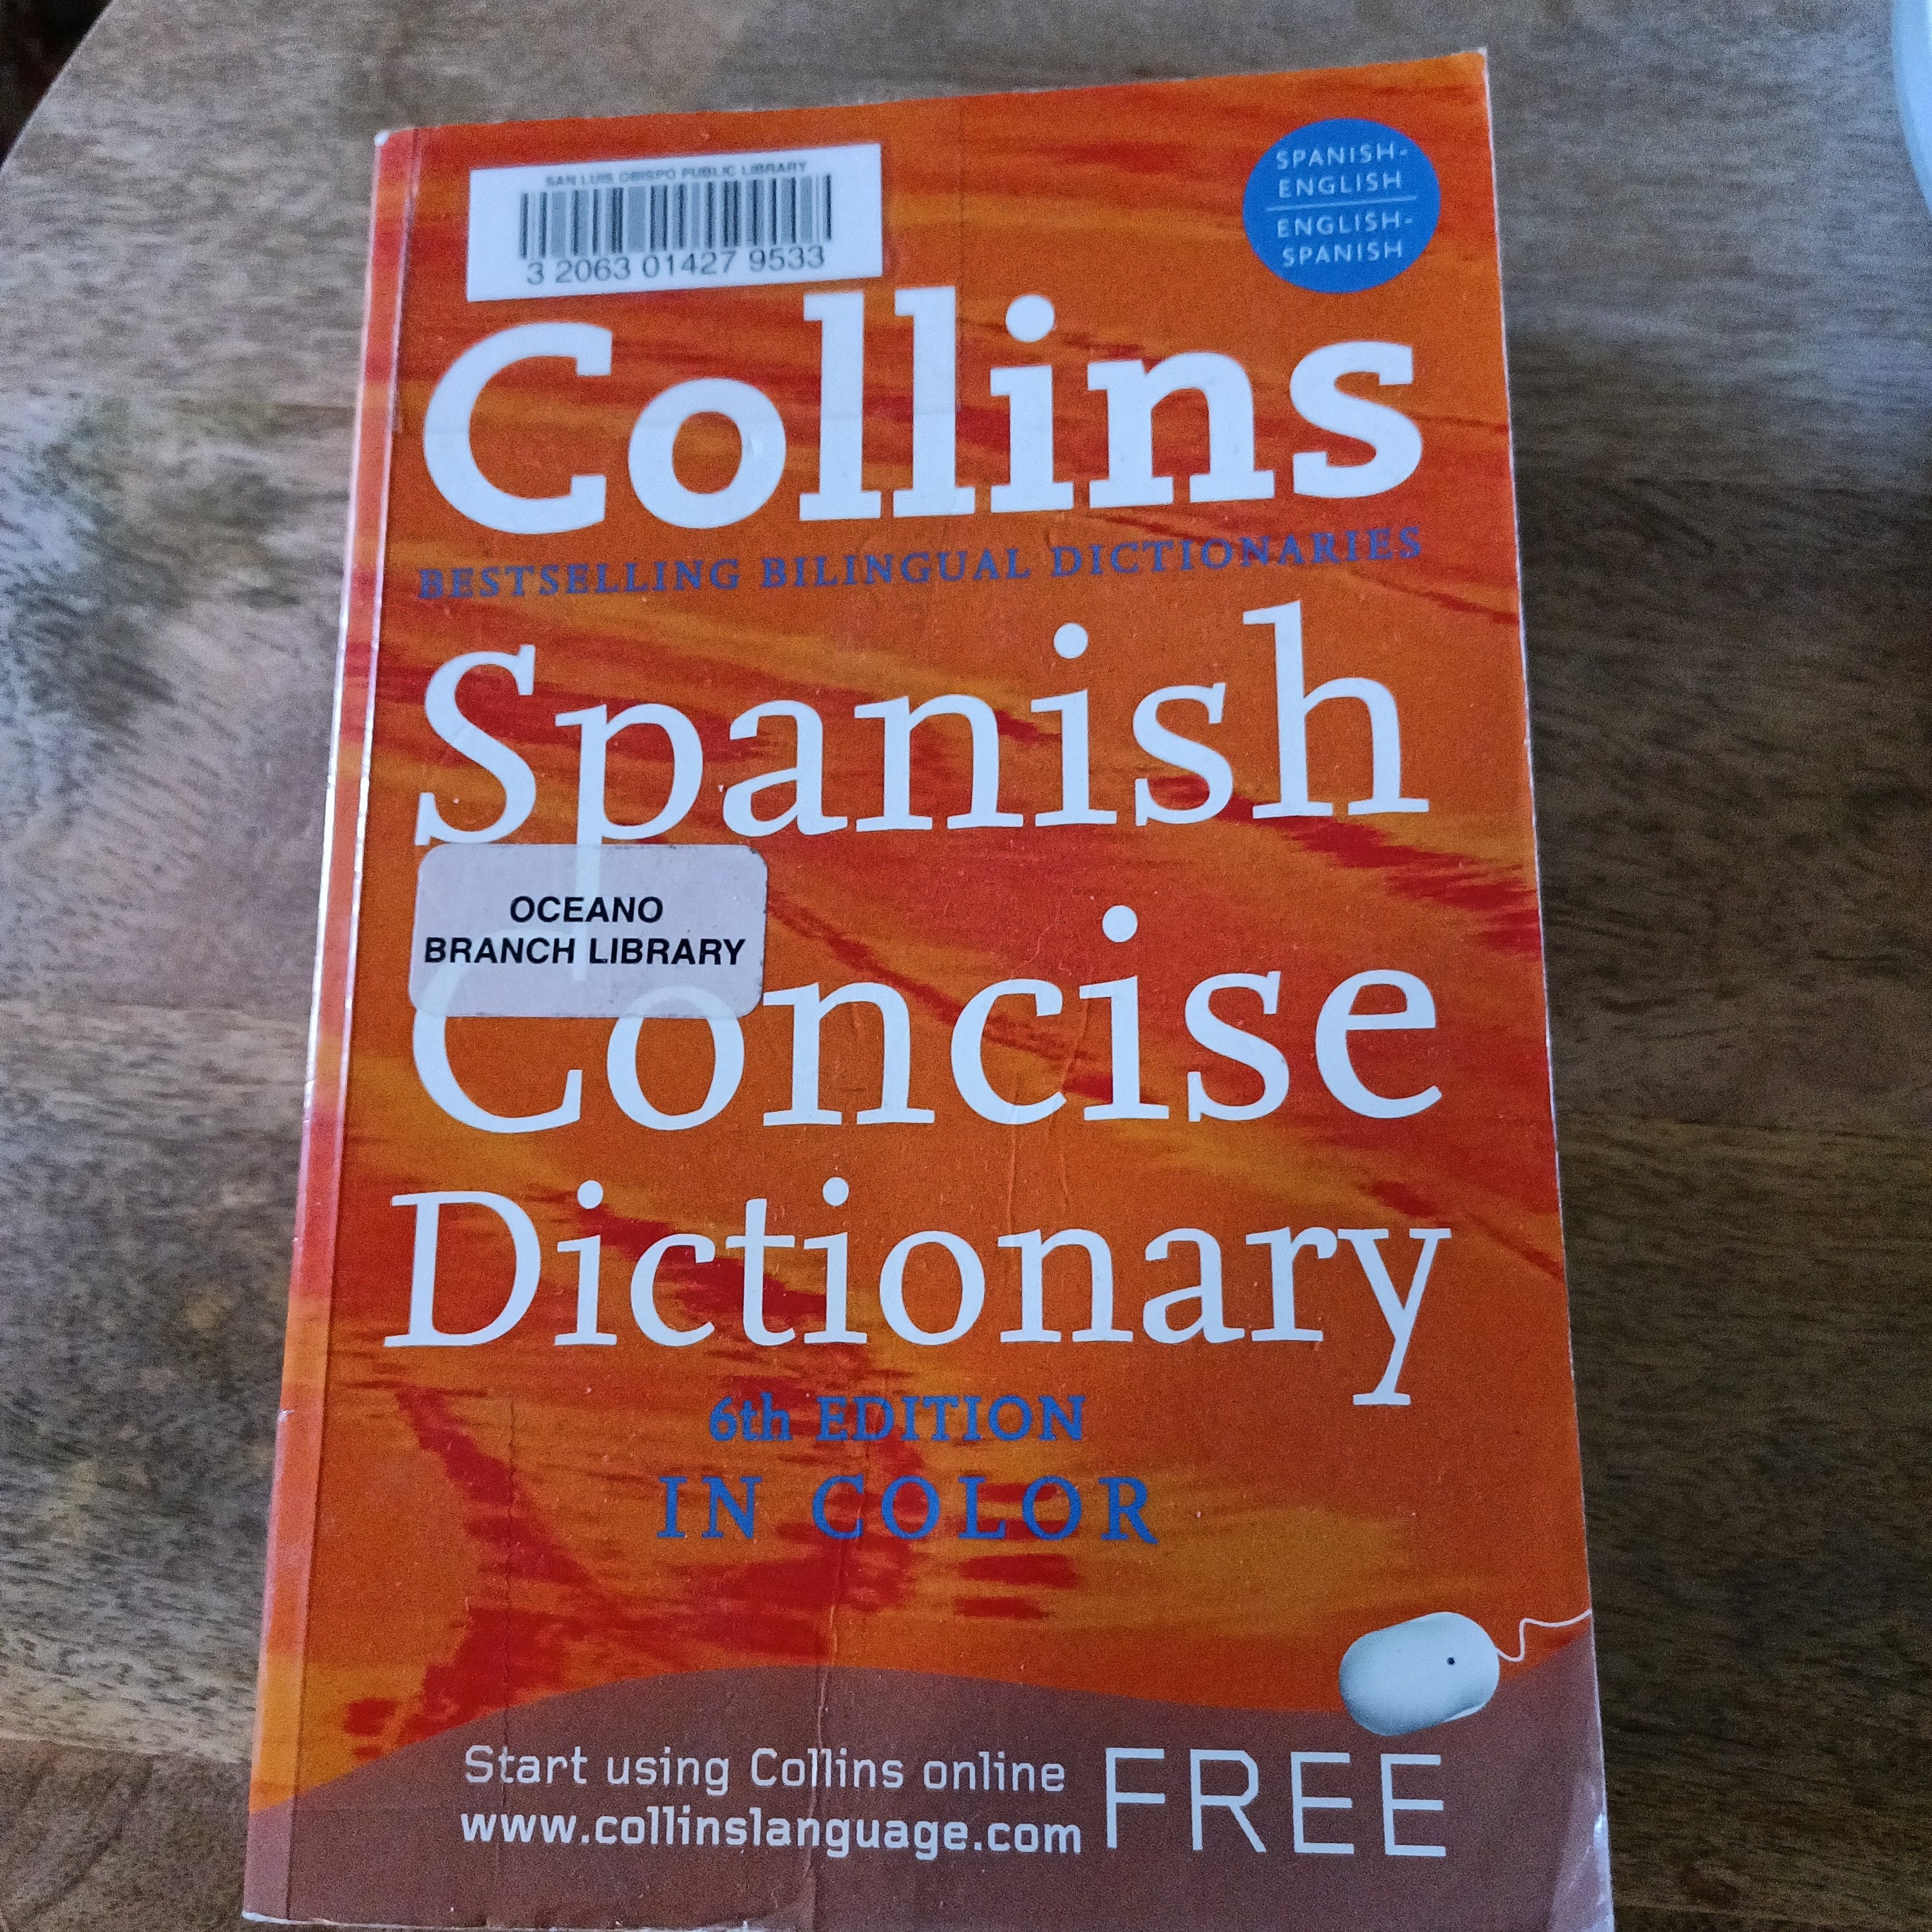 Ltd.,　6th　Collins　HarperCollins　Concise　HarperCollins　Dictionary,　Paperback　Edition　Spanish　Publishers　by　Pangobooks